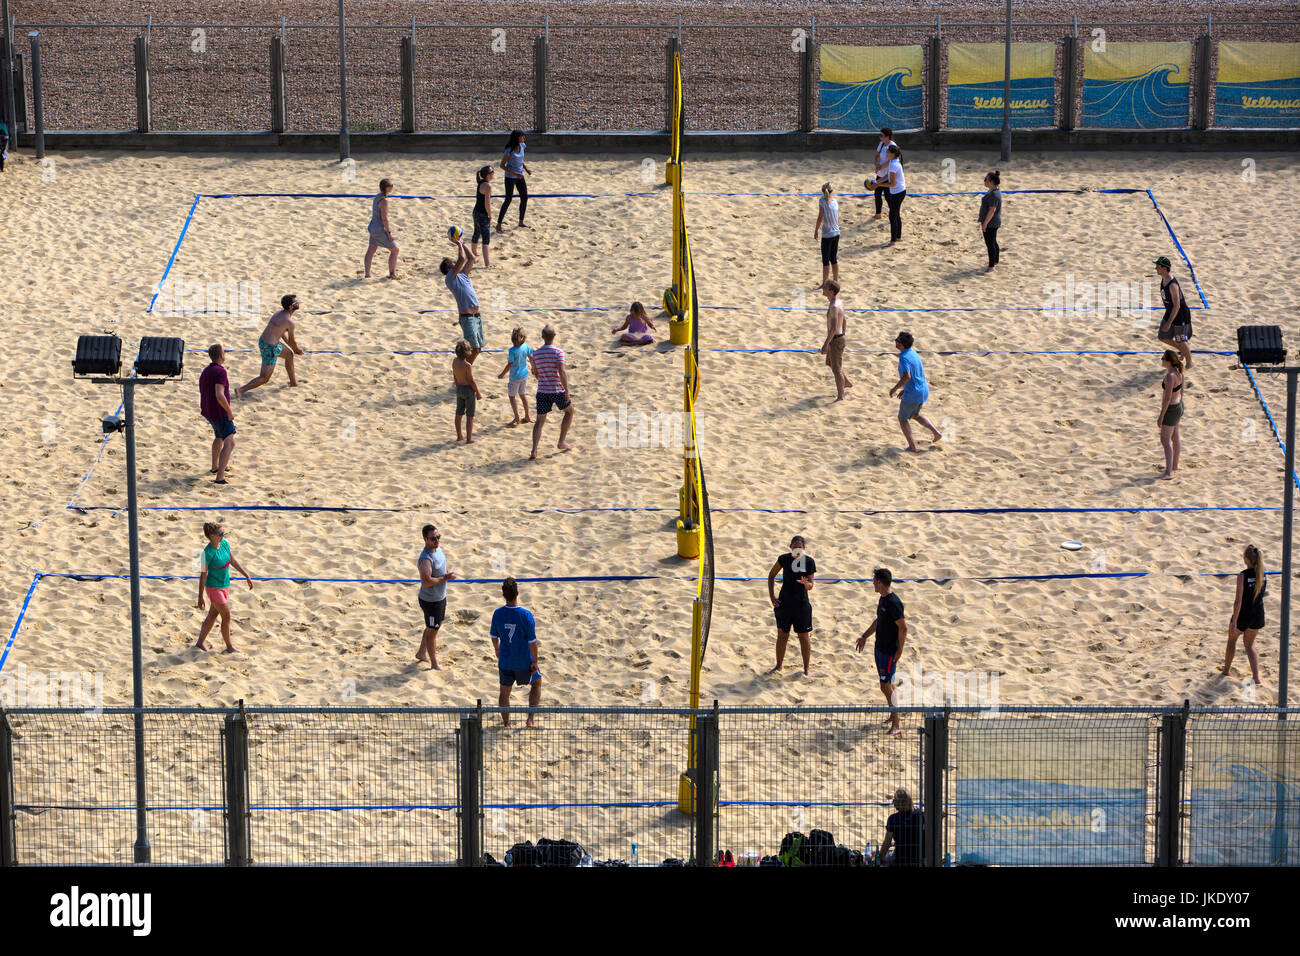 Beach Volleyball being played on the beach in Brighton, England. Stock Photo